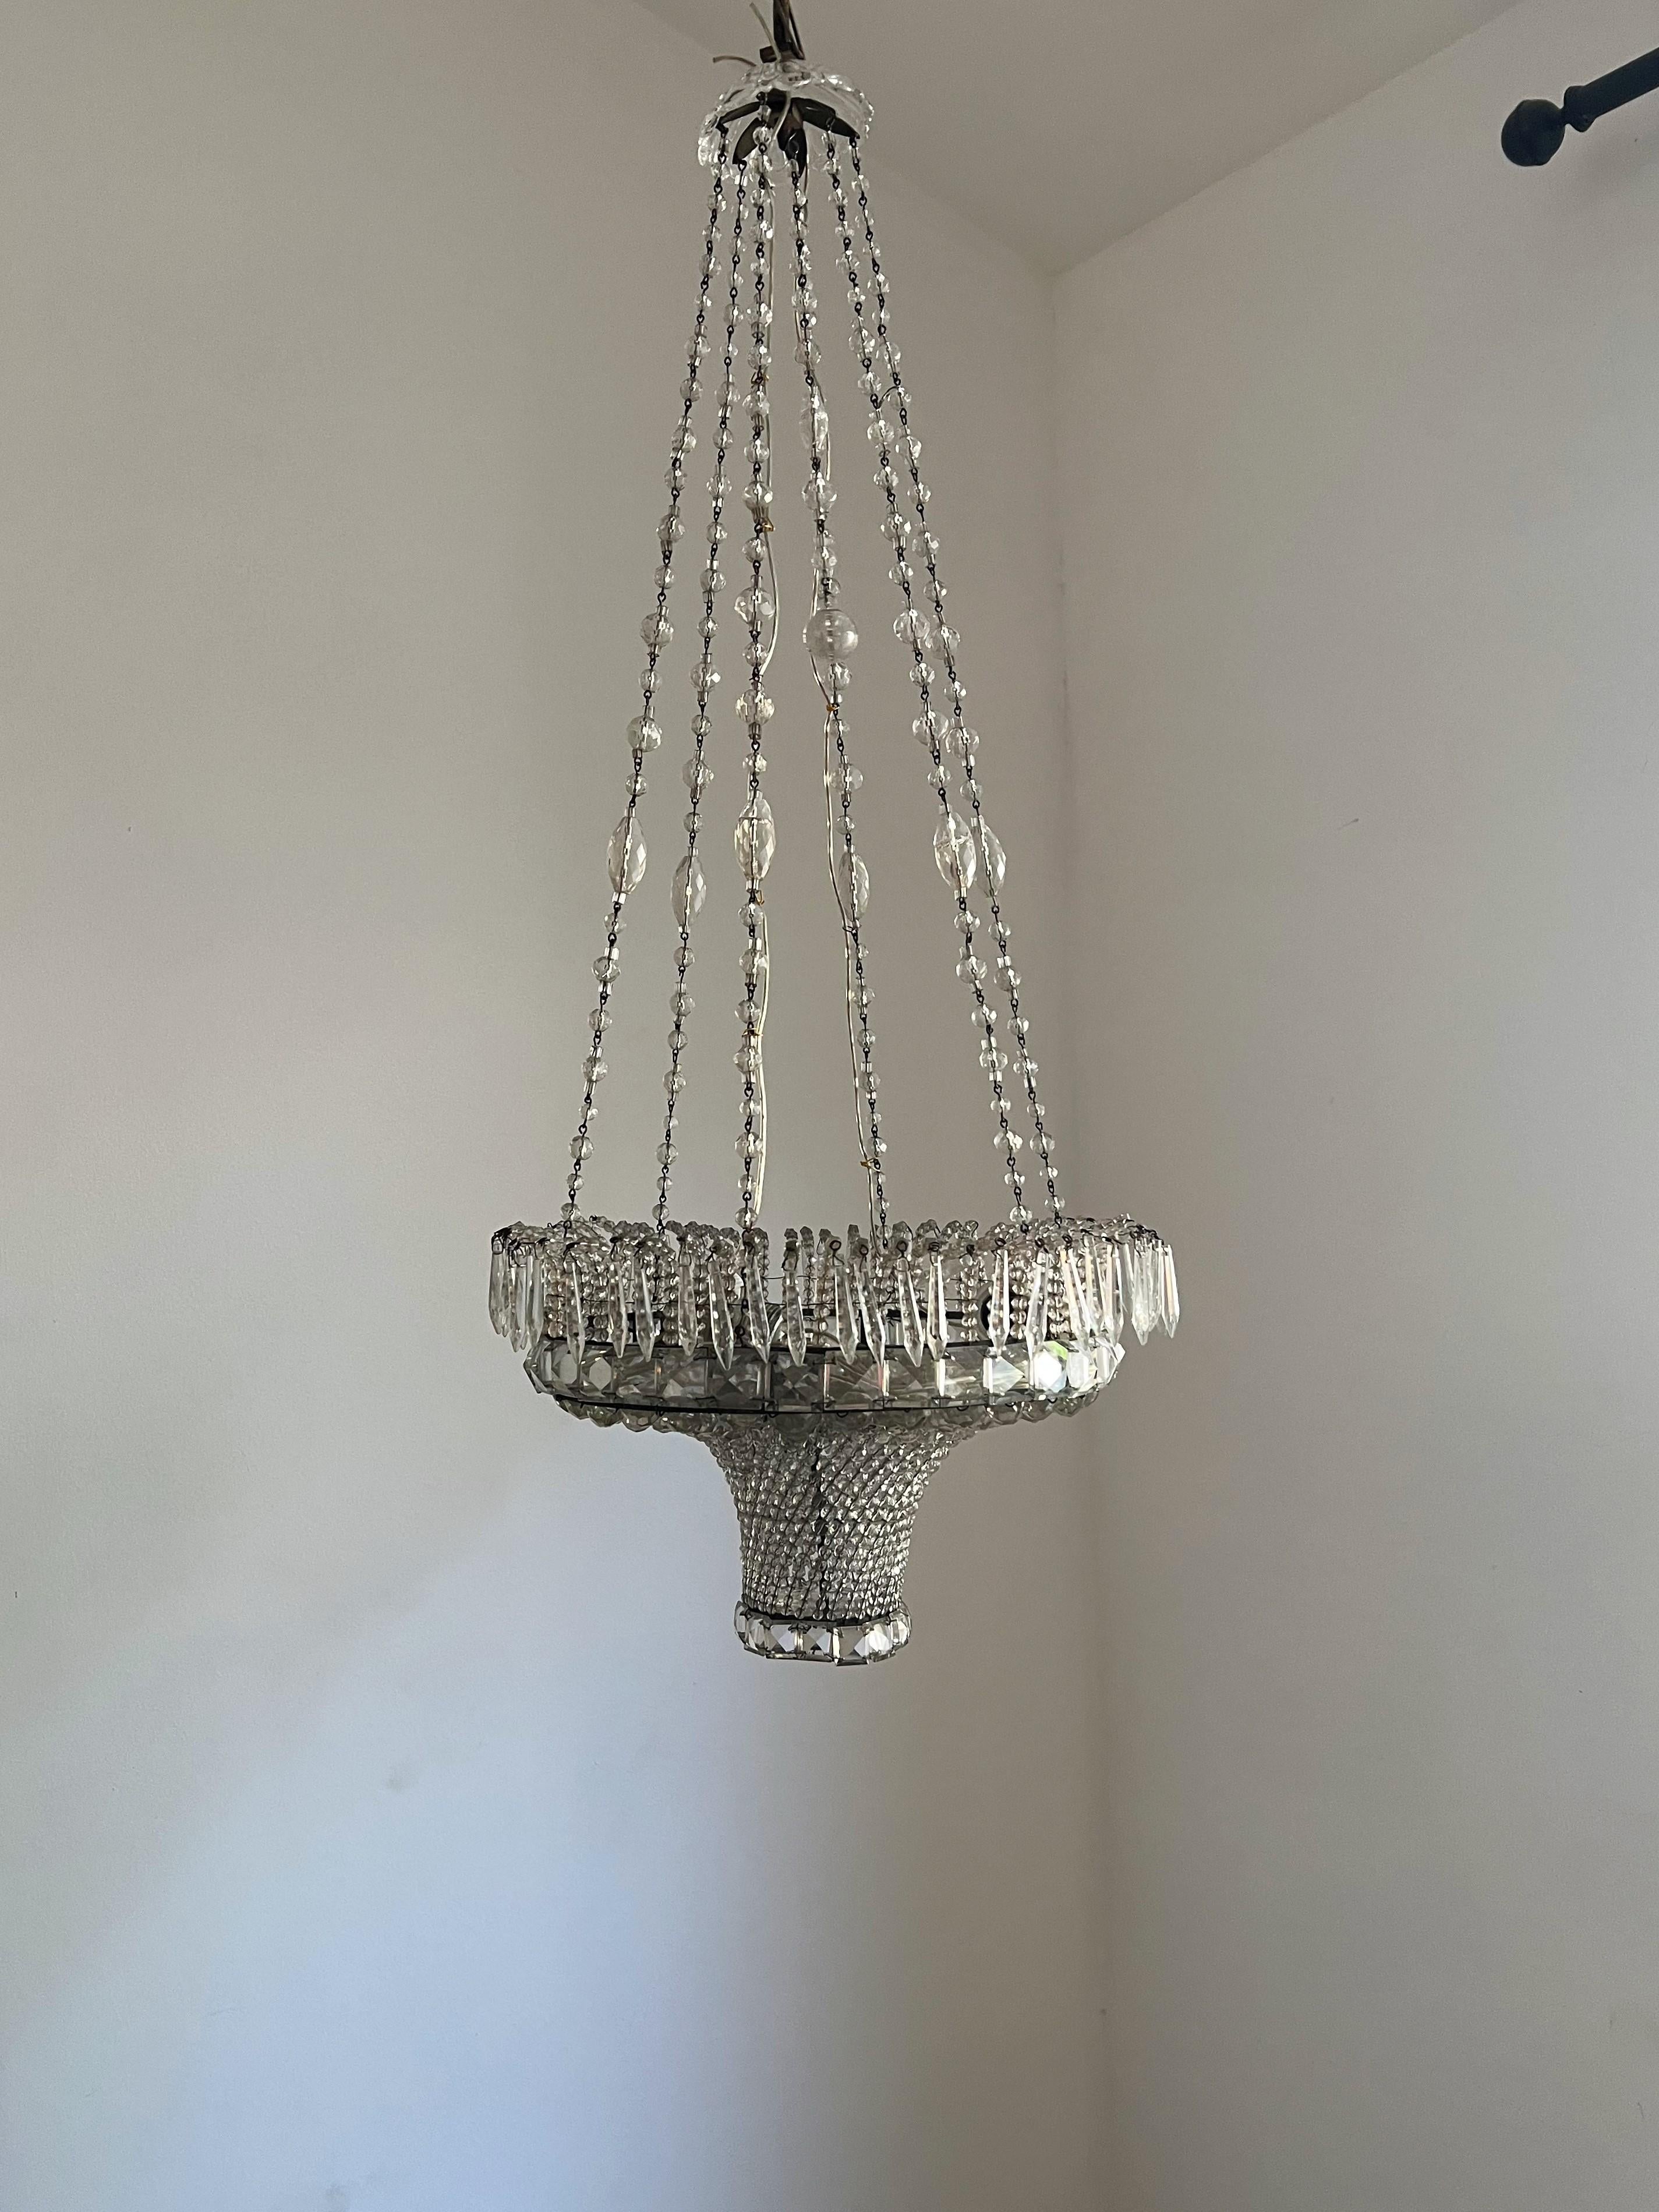 Art Deco chandelier manufactured in hand cut crystal and a metal frame.
Each of the glass drops has been hand cut and assembled into this beautiful piece of art.
There is a matching pair of sconces listed separately in our shop.
The Chandelier holds